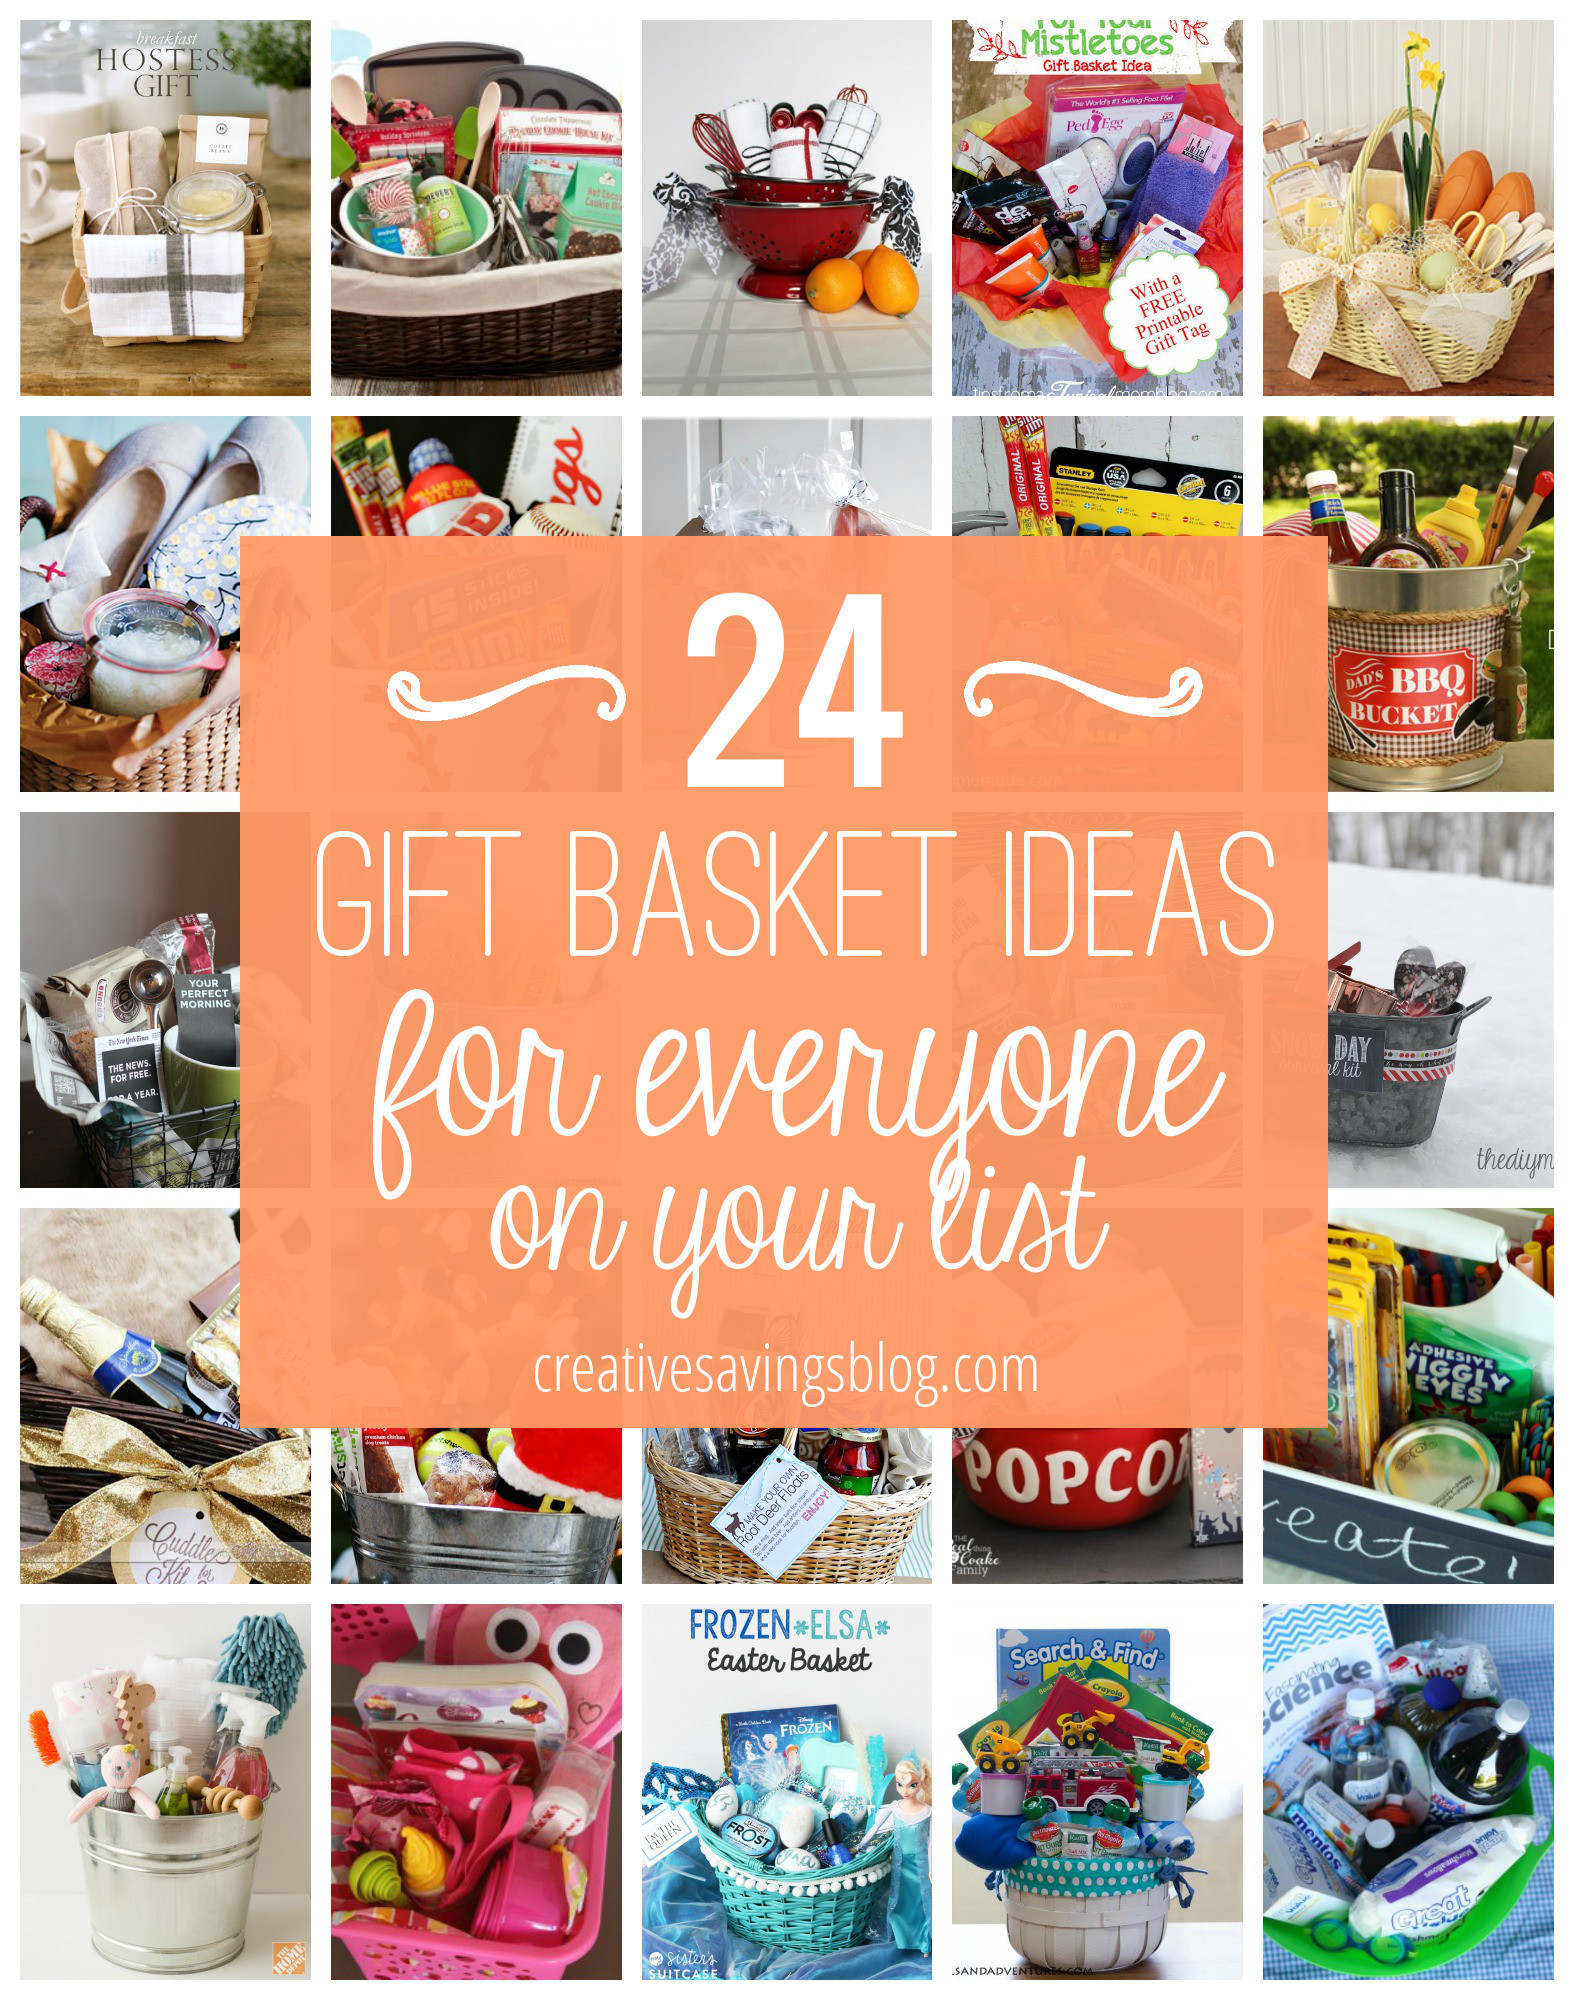 Gift Basket Diy Ideas
 DIY Gift Basket Ideas for Everyone on Your List